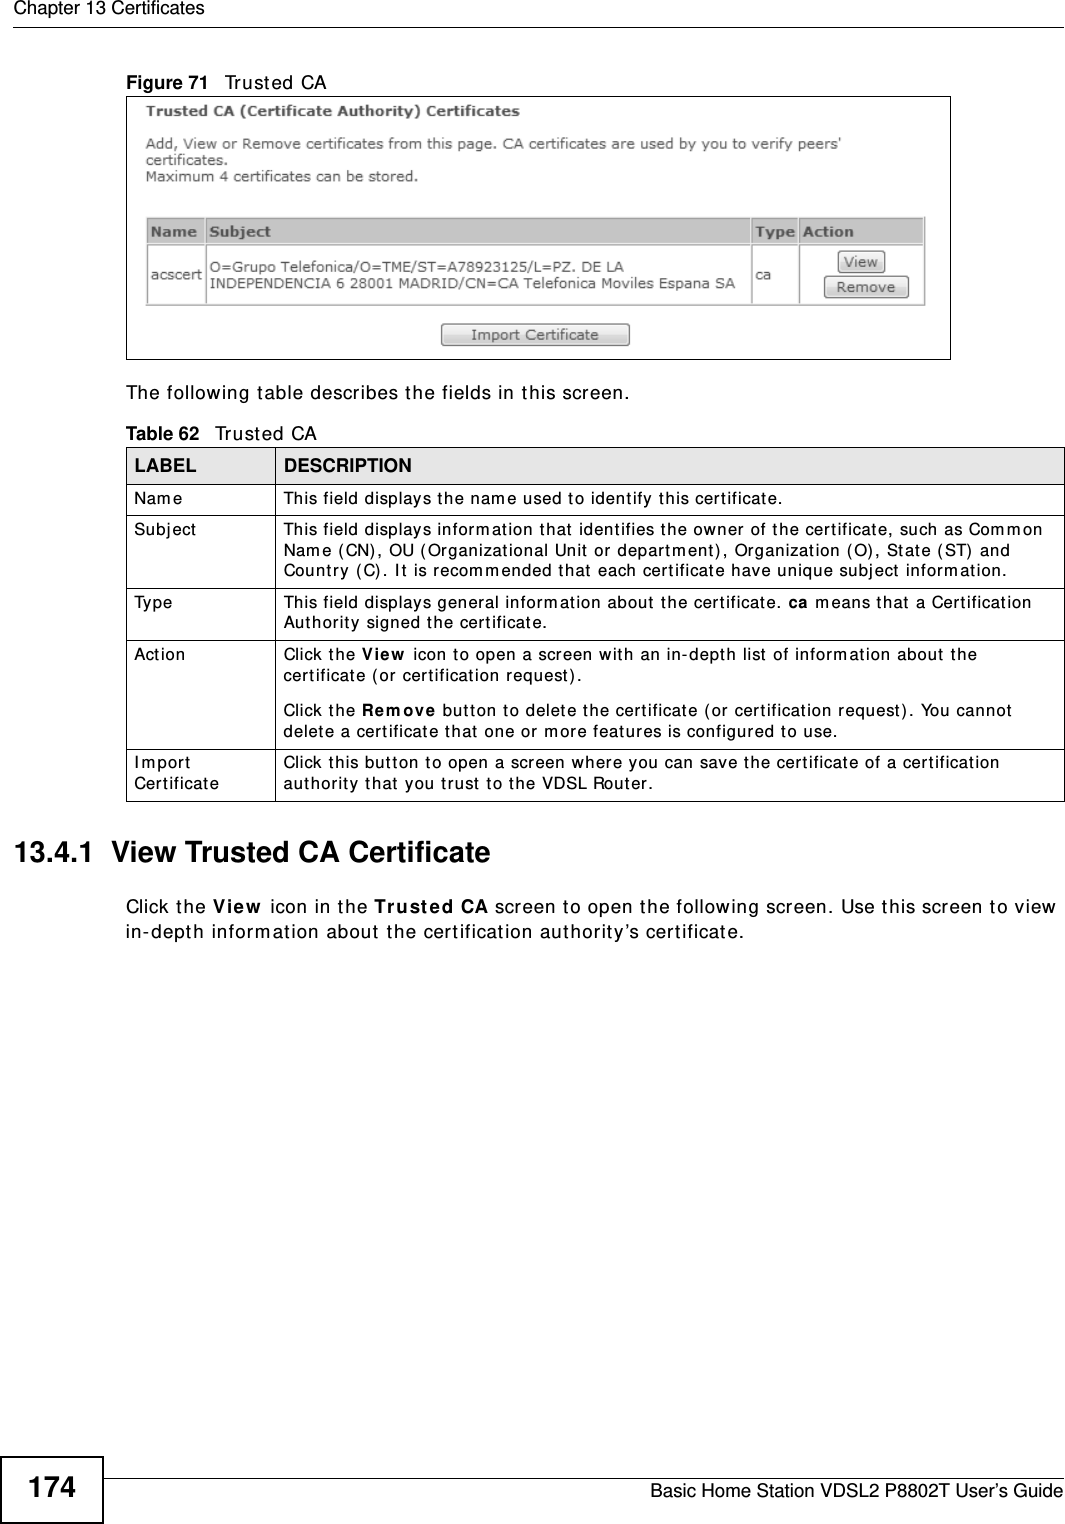 Chapter 13 CertificatesBasic Home Station VDSL2 P8802T User’s Guide174Figure 71   Tr u st e d  CA  The following t able describes t he fields in this screen. 13.4.1  View Trusted CA CertificateClick the View  icon in the Tr ust e d CA screen t o open t he following screen. Use t his screen t o view  in- dept h inform at ion about t he certificat ion aut horit y’s certificat e.Table 62   Tr u st e d  CALABEL DESCRIPTIONNam e This field displays the nam e used to ident ify this certificat e. Subject This field displays infor m at ion t hat  ident ifies the ow ner of t he cert ificat e, such as Com m on Name ( CN) , OU ( Organizat ional Unit  or depart m ent) , Organizat ion ( O) , St at e (ST)  and Countr y ( C). I t is recom m ended t hat  each cert ificat e have unique subj ect  inform at ion.Type This field displays general inform ation about  the cer tificat e. ca m eans that  a Cert ificat ion Aut hority signed the certificat e. Act ion Click the View  icon t o open a screen with an in-depth list  of inform ation about  the cer tificate (or cert ificat ion request) .Click the Re m ove but ton to delet e the certificat e (or  cert ificat ion request ). You cannot delet e a cert ificat e that  one or m ore feat ures is configured to use.I m port CertificateClick this but ton t o open a scr een where you can save the cert ificat e of a cert ificat ion authority that  you t r ust  t o the VDSL Router.